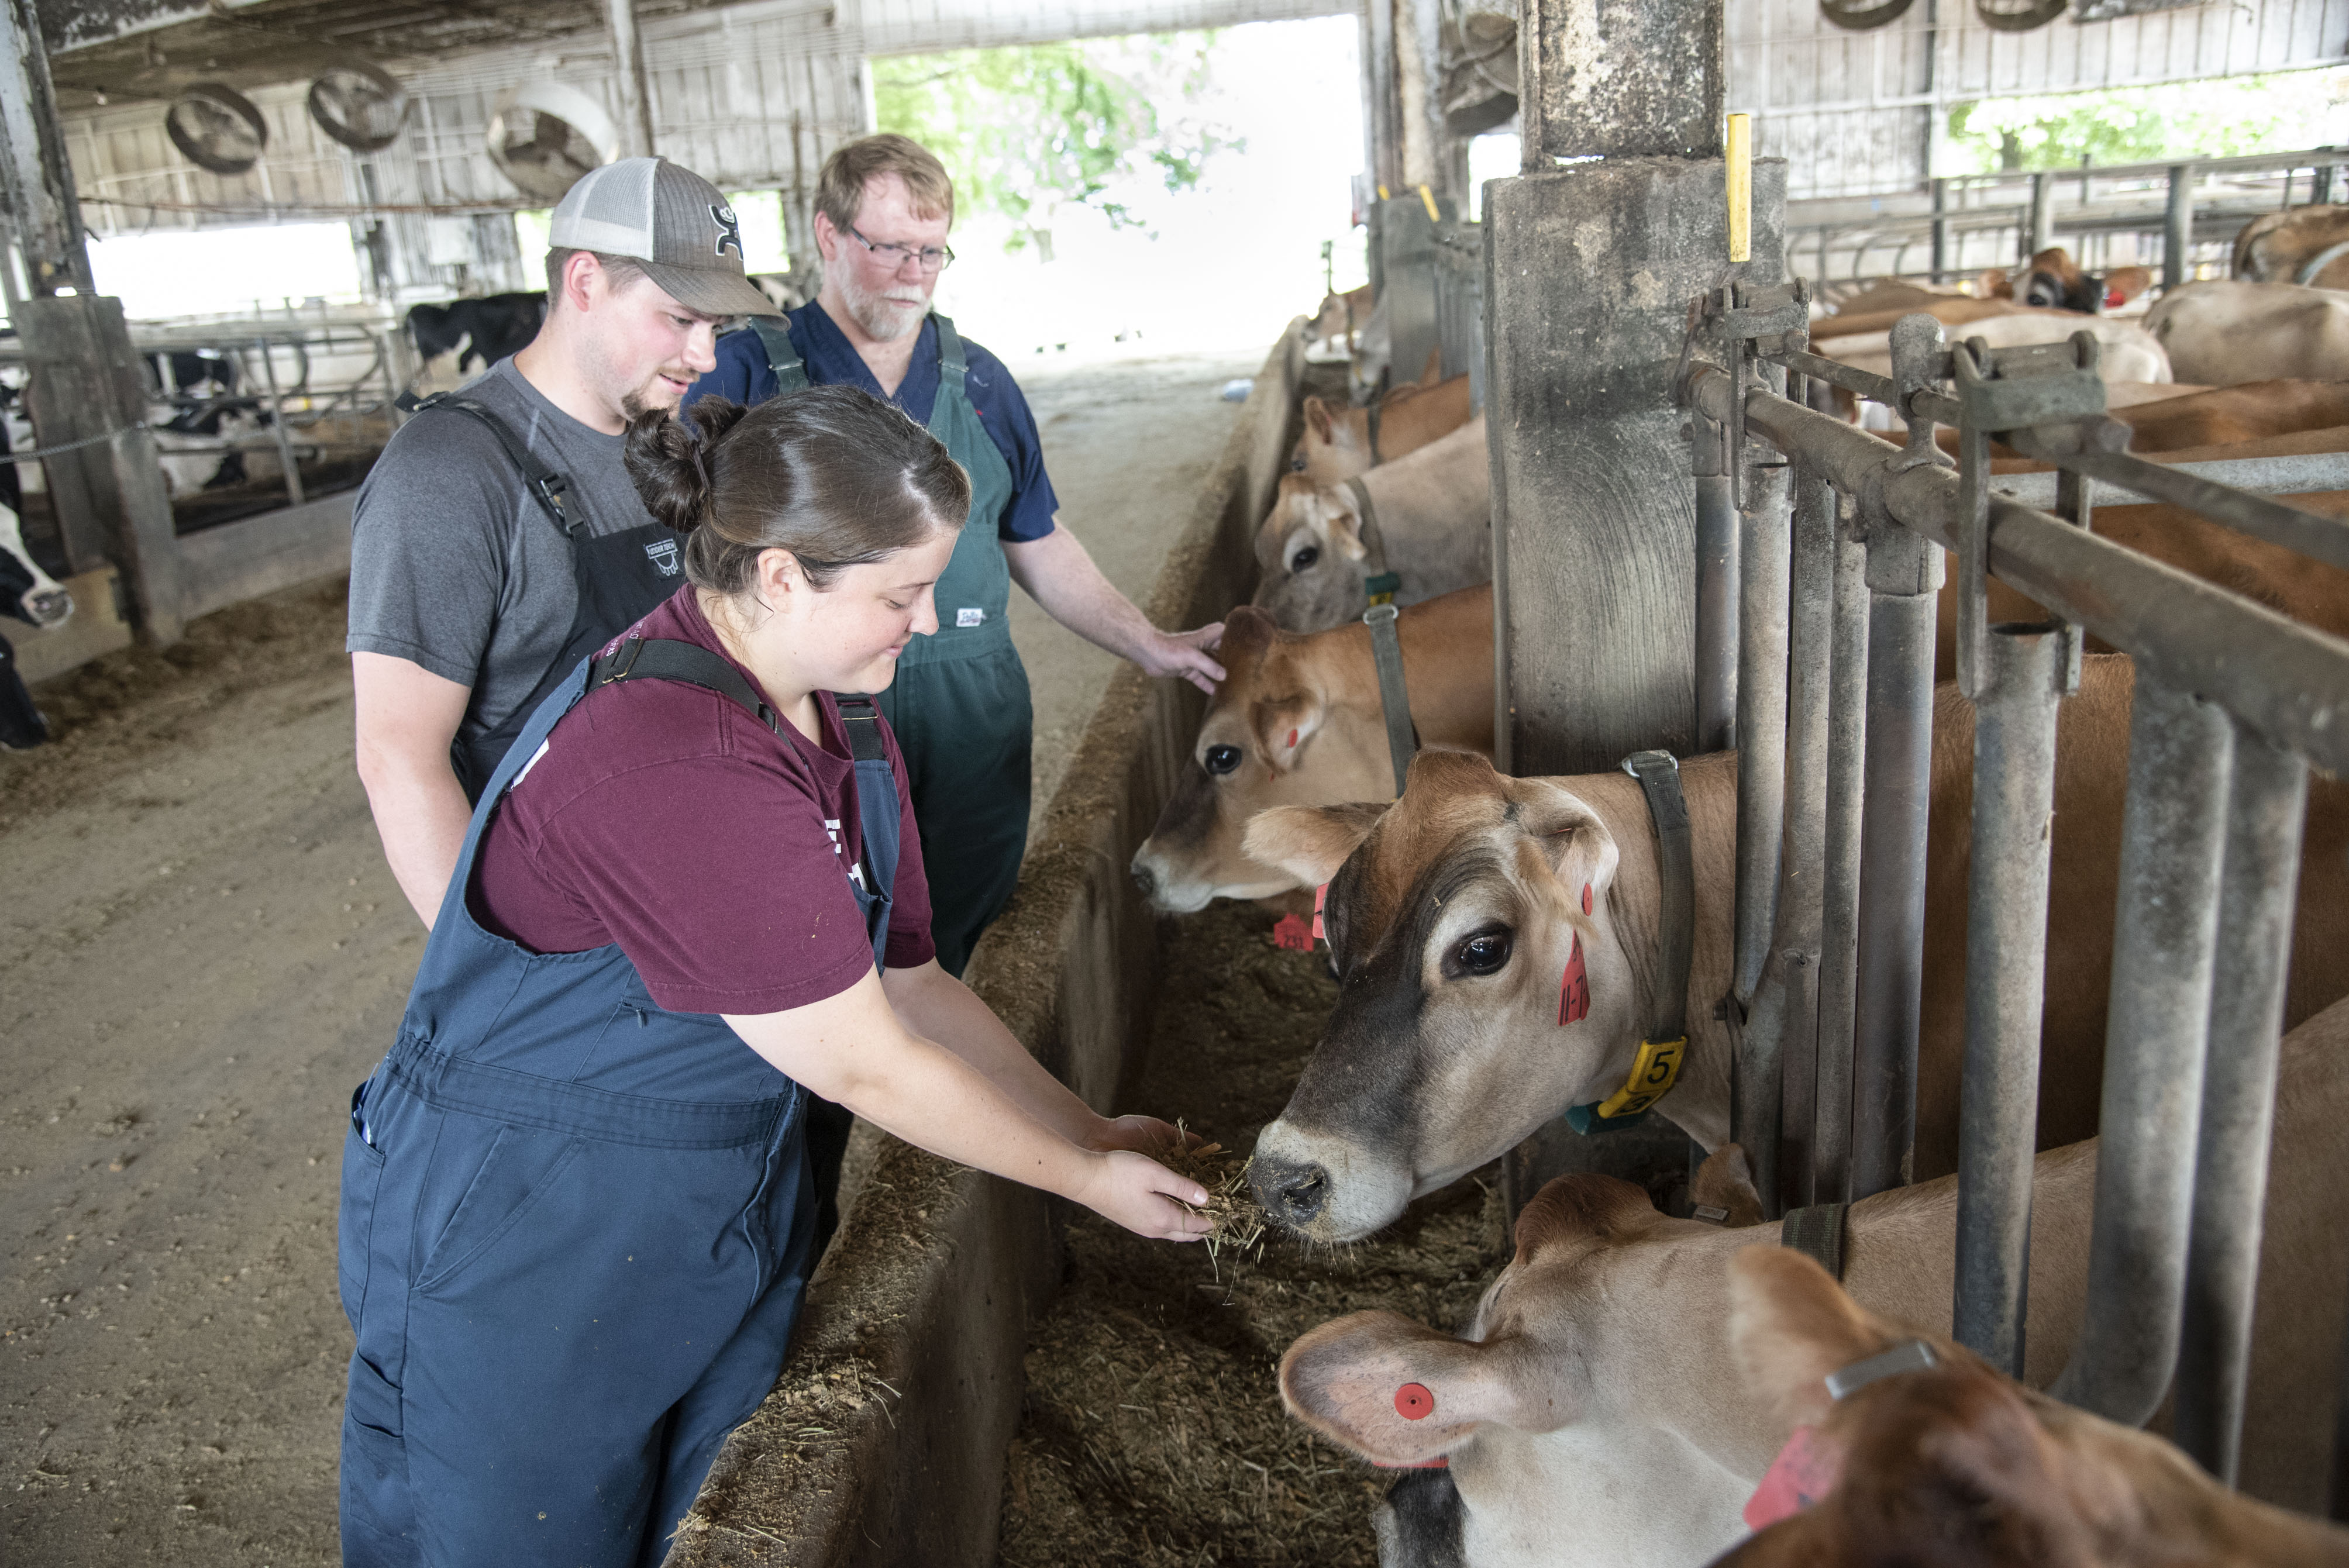 A veterinarian and two students examine a cow in a pen